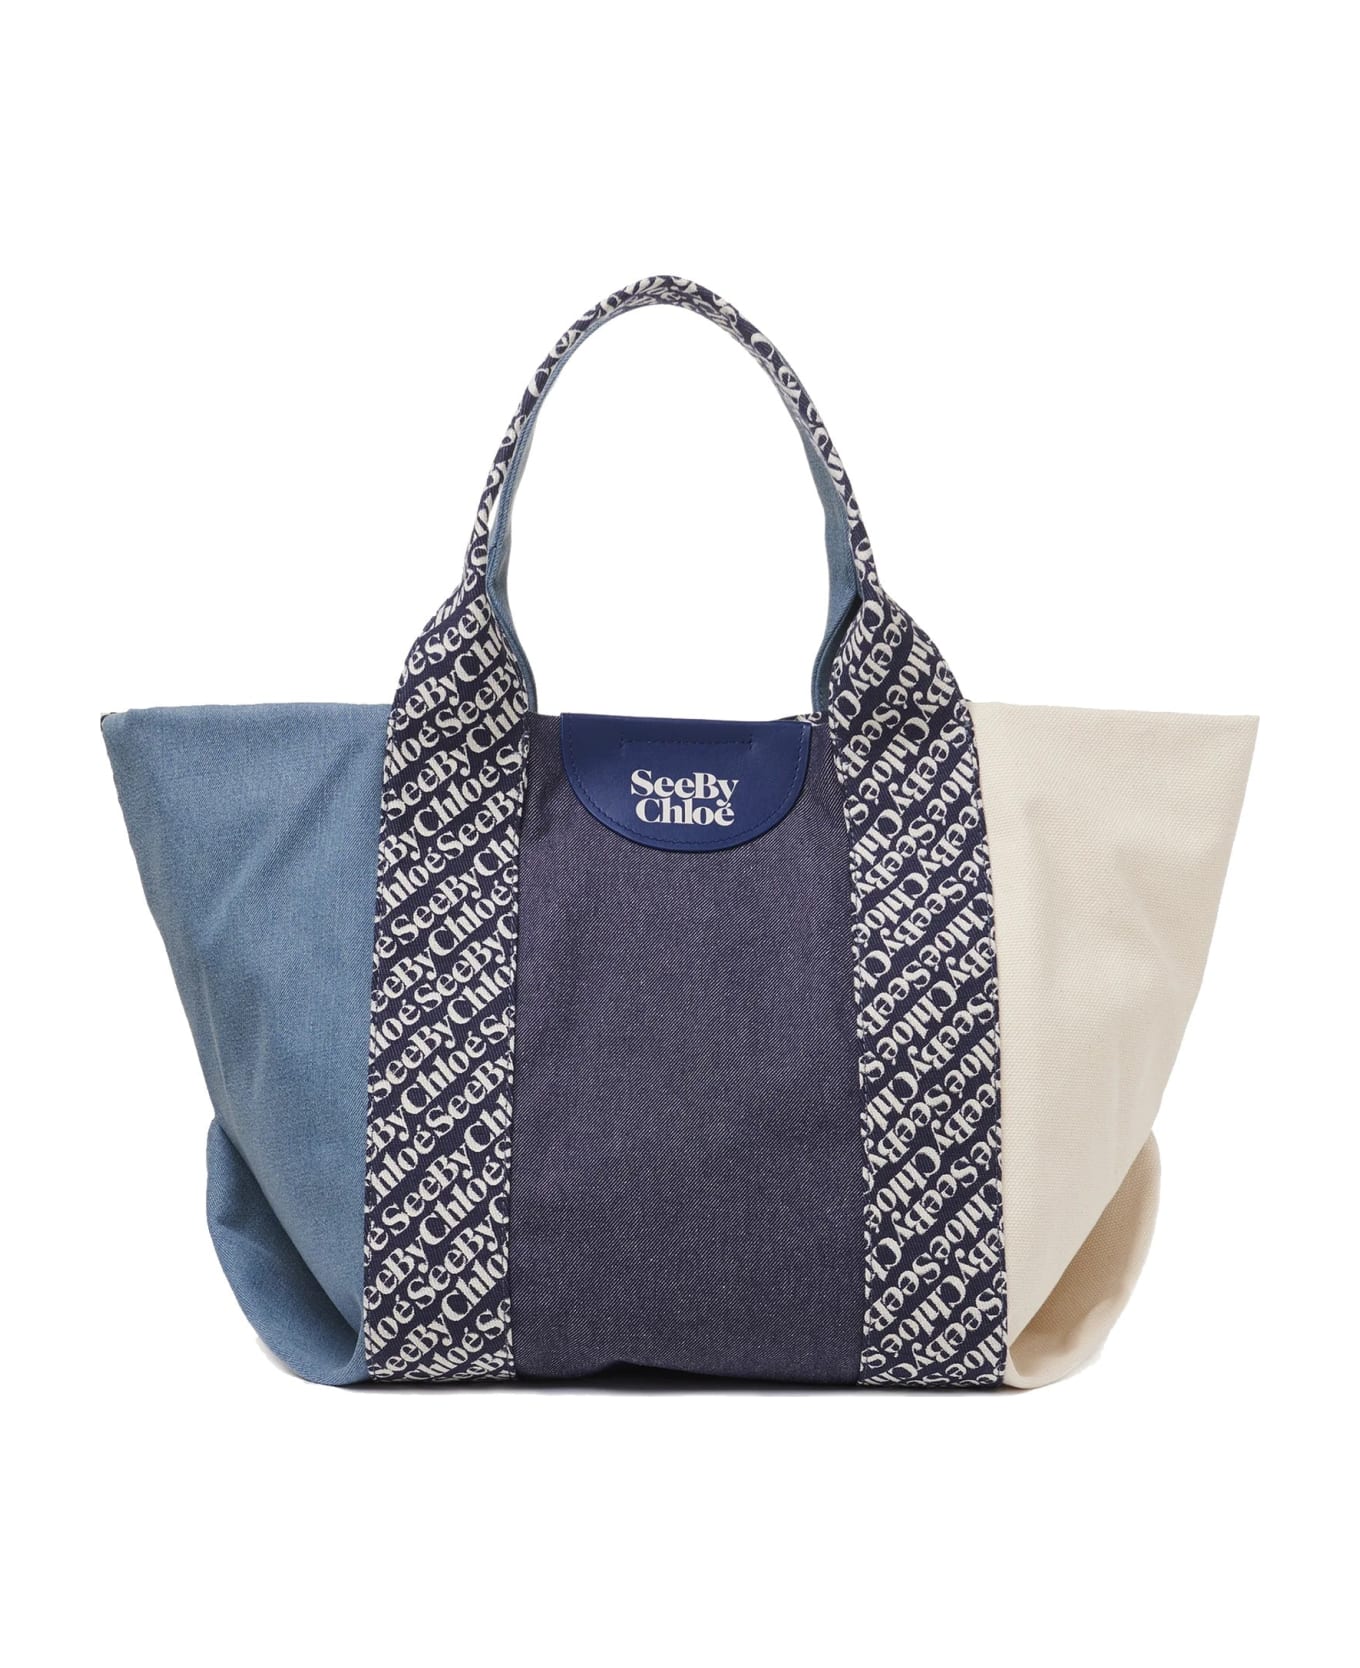 See by Chloé Letizia Tote Bag - Blue トートバッグ